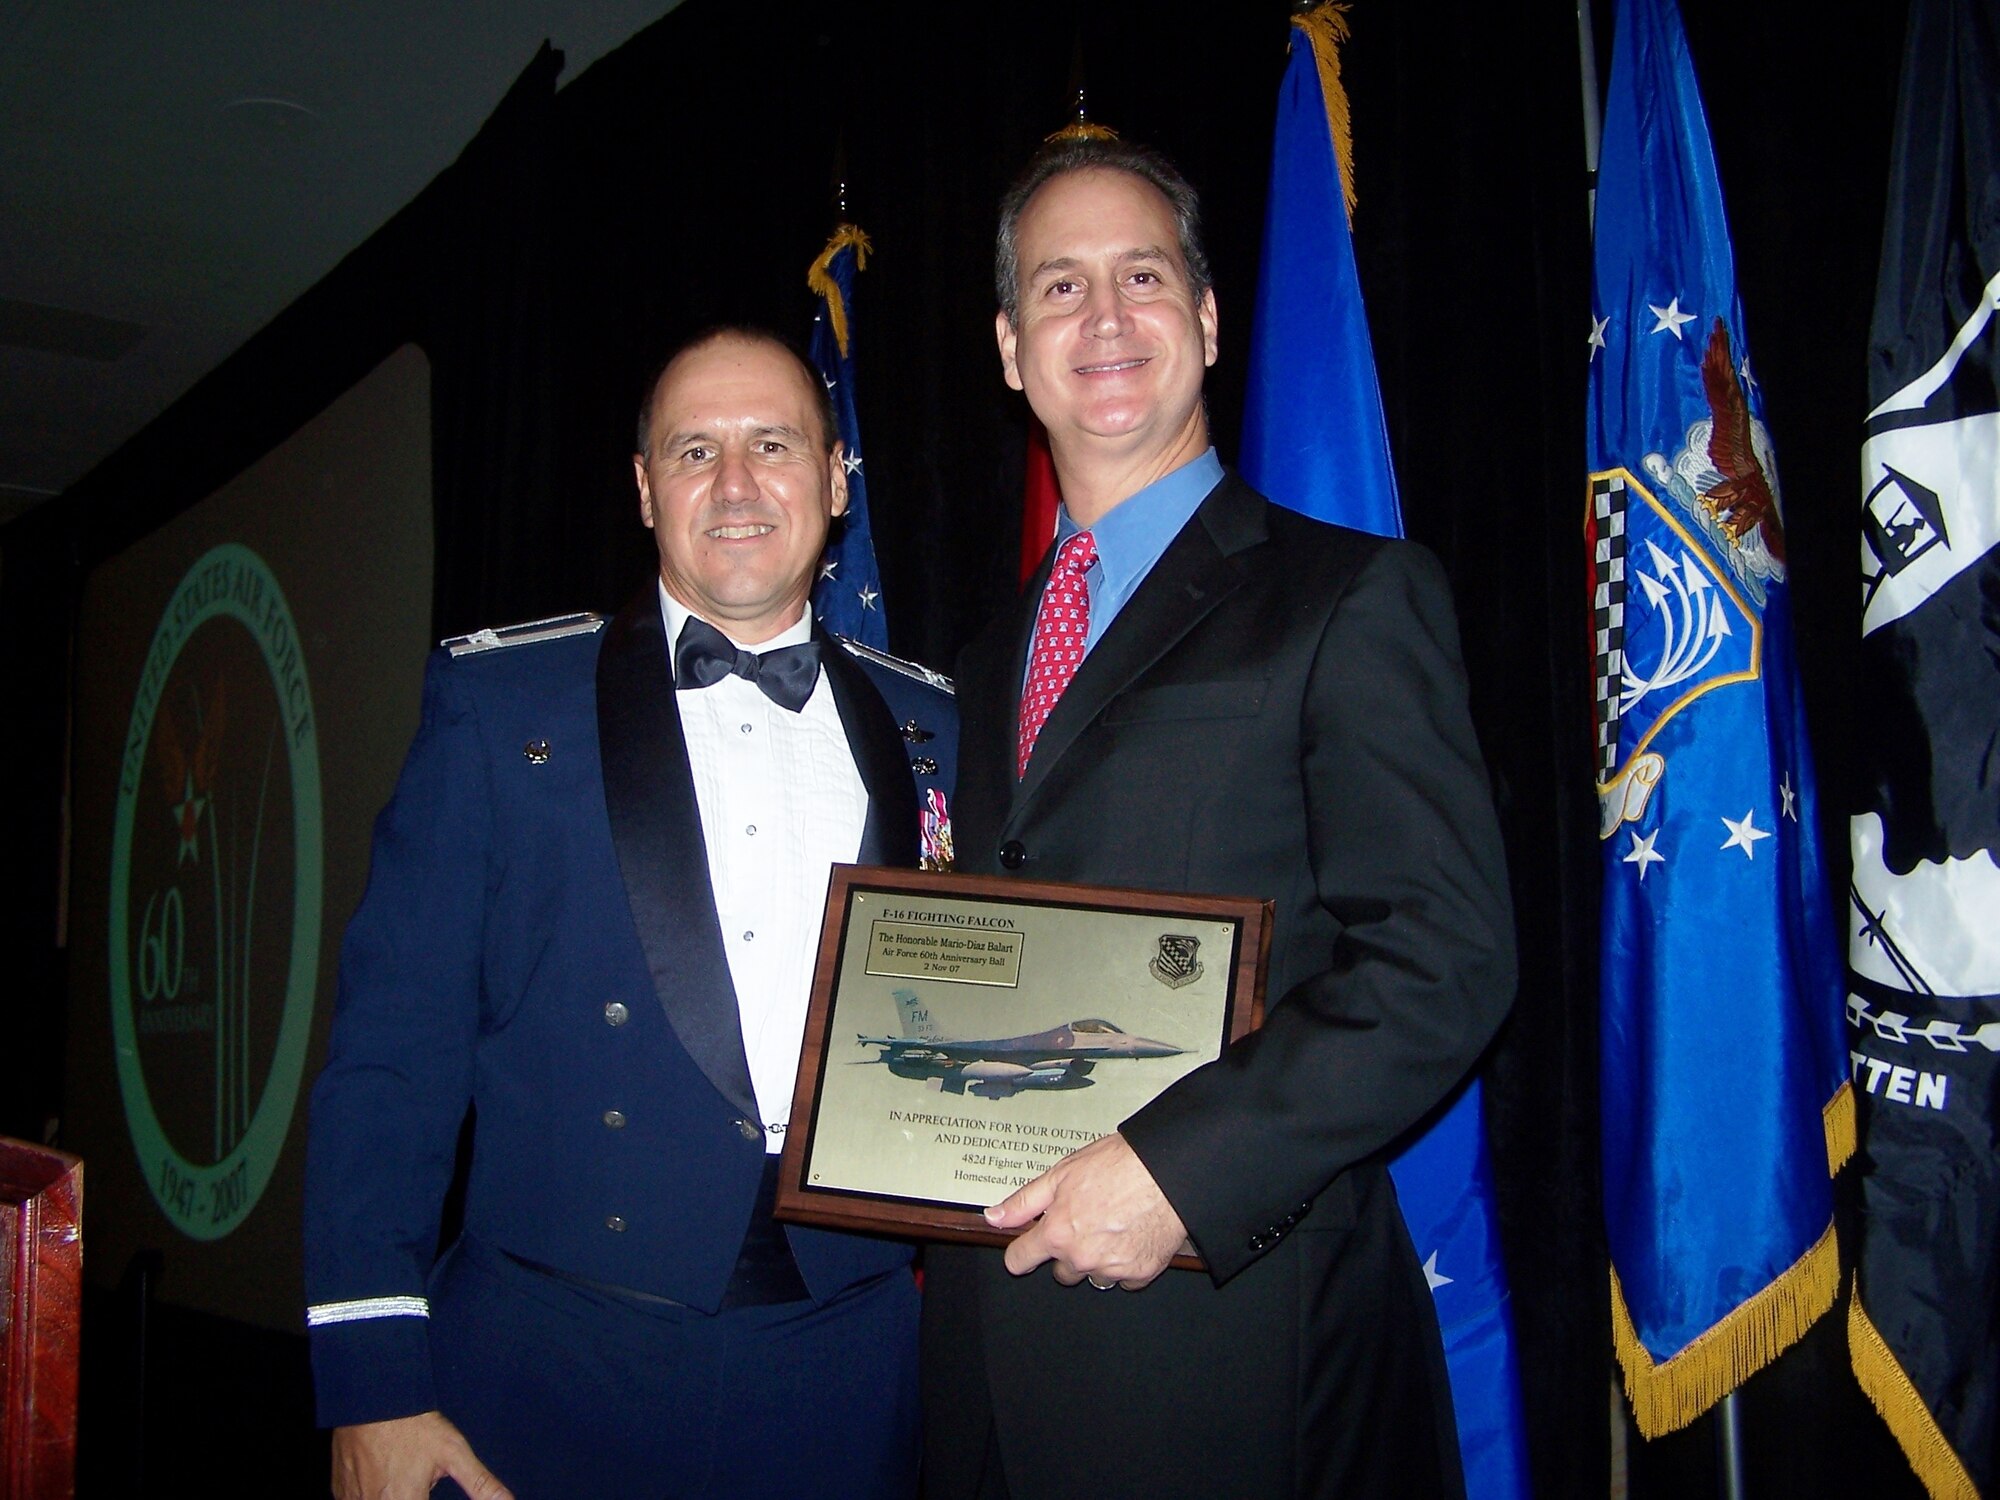 Col. Randy Falcon, 482nd Fighter Wing commander presents a wing plaque to guest speaker U.S. Rep. Mario Diaz-Balart, 25th District of Florida, Nov. 2, 2007. Congressman Diaz-Balart addressed the attendees of  Homestead Air Reserve Base’s "Heritage to Horizons" Air Force Ball.  The night’s event was part of a year long world-wide celebration commemorating the 60th Anniversary of the U.S. Air Force and local military members recently deployed. The gala was co-hosted by the 482nd Fighter Wing, Homestead ARB, Fla., and the Greater Homestead/Florida City Chamber of Commerce Military Affairs Committee. (U.S. Air Force photo/Lt. Col. Tom Davis)